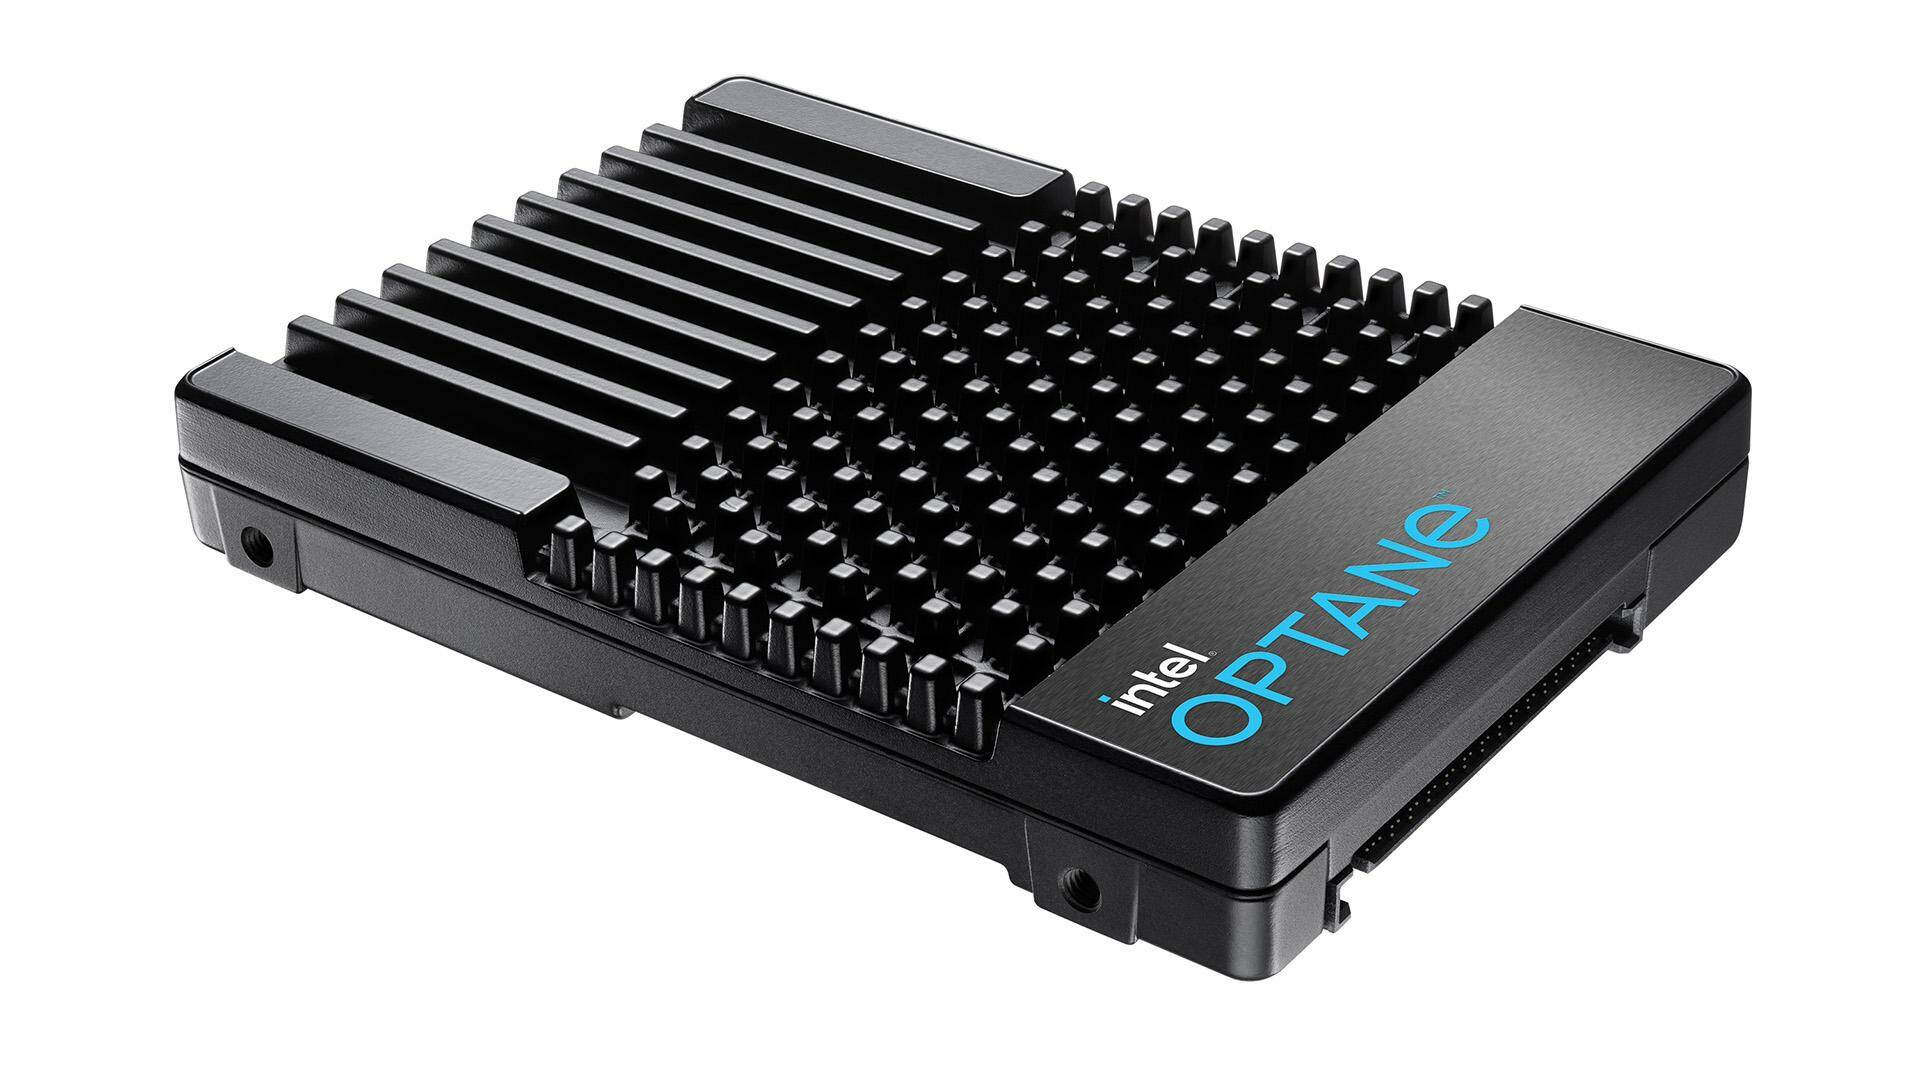 Intel releases new SSDs after off biz in July • The Register